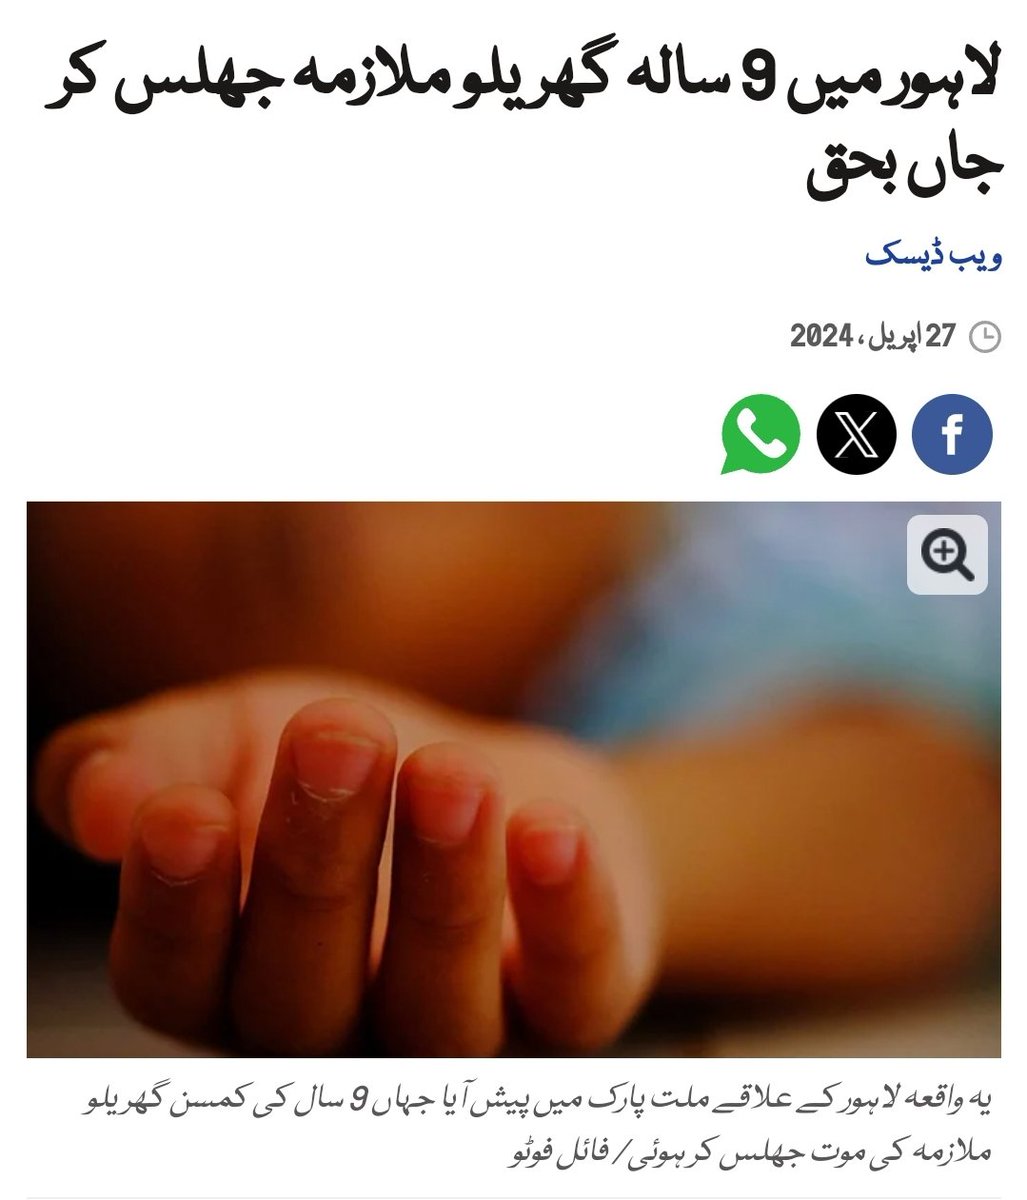 A 9-year old (girl) domestic worker died during the house work in Lahore, reports @geonews_urdu. Punjab Domestic Workers Act 2019 says 'No child undr the age of 15 yrs shall b allowed to work in a household but still around 4 million childrn r into child labour. @MaryamNSharif